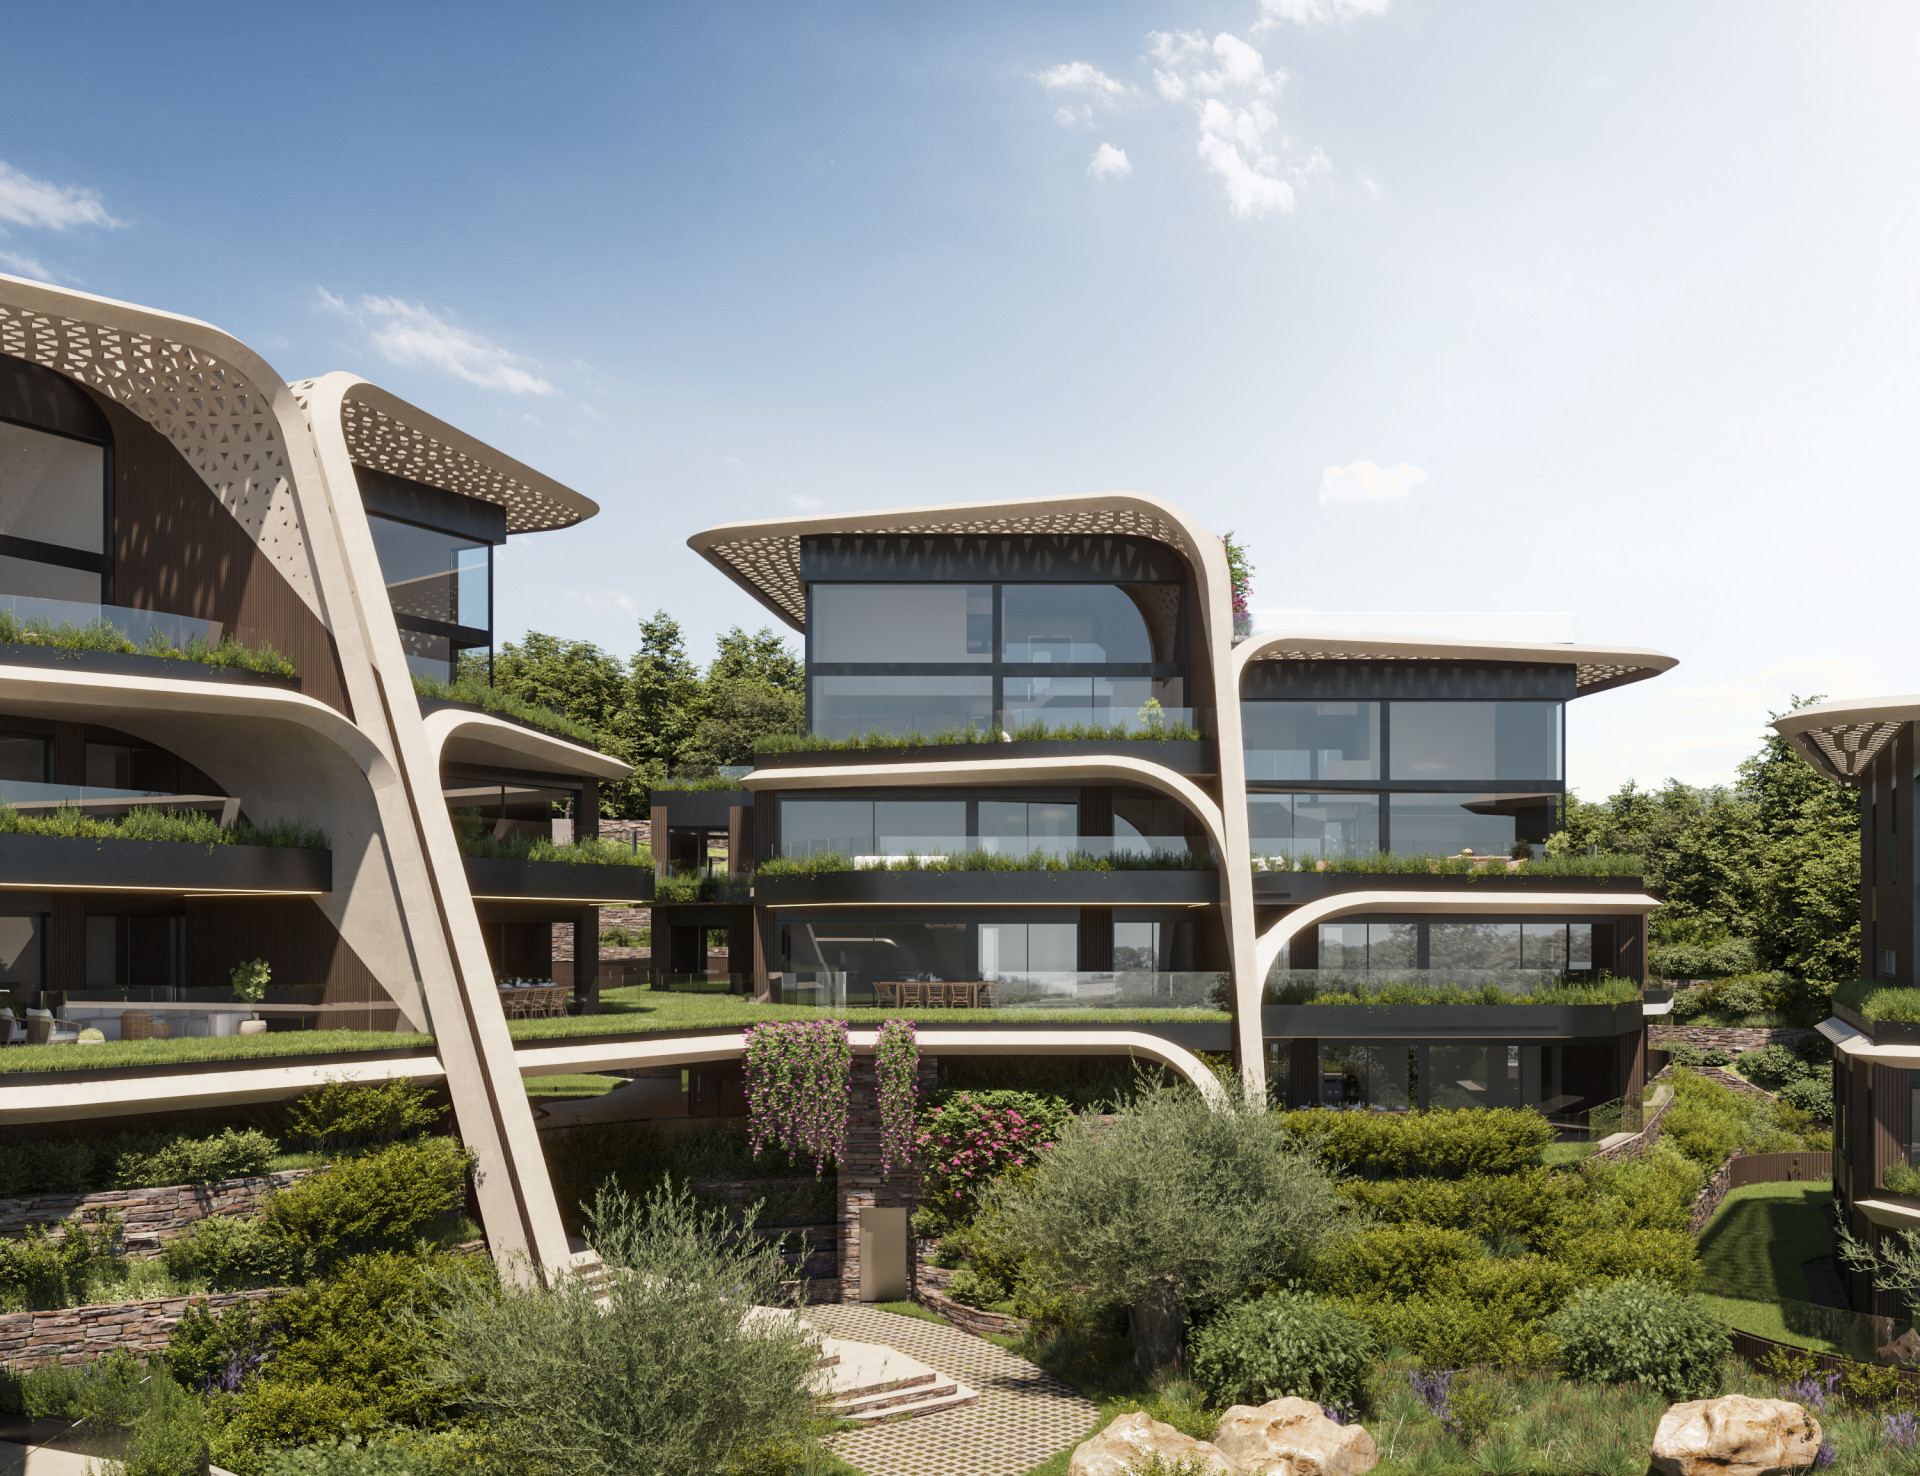 Sphere, exclusive apartments and duplex penthouses integrated in nature in So...